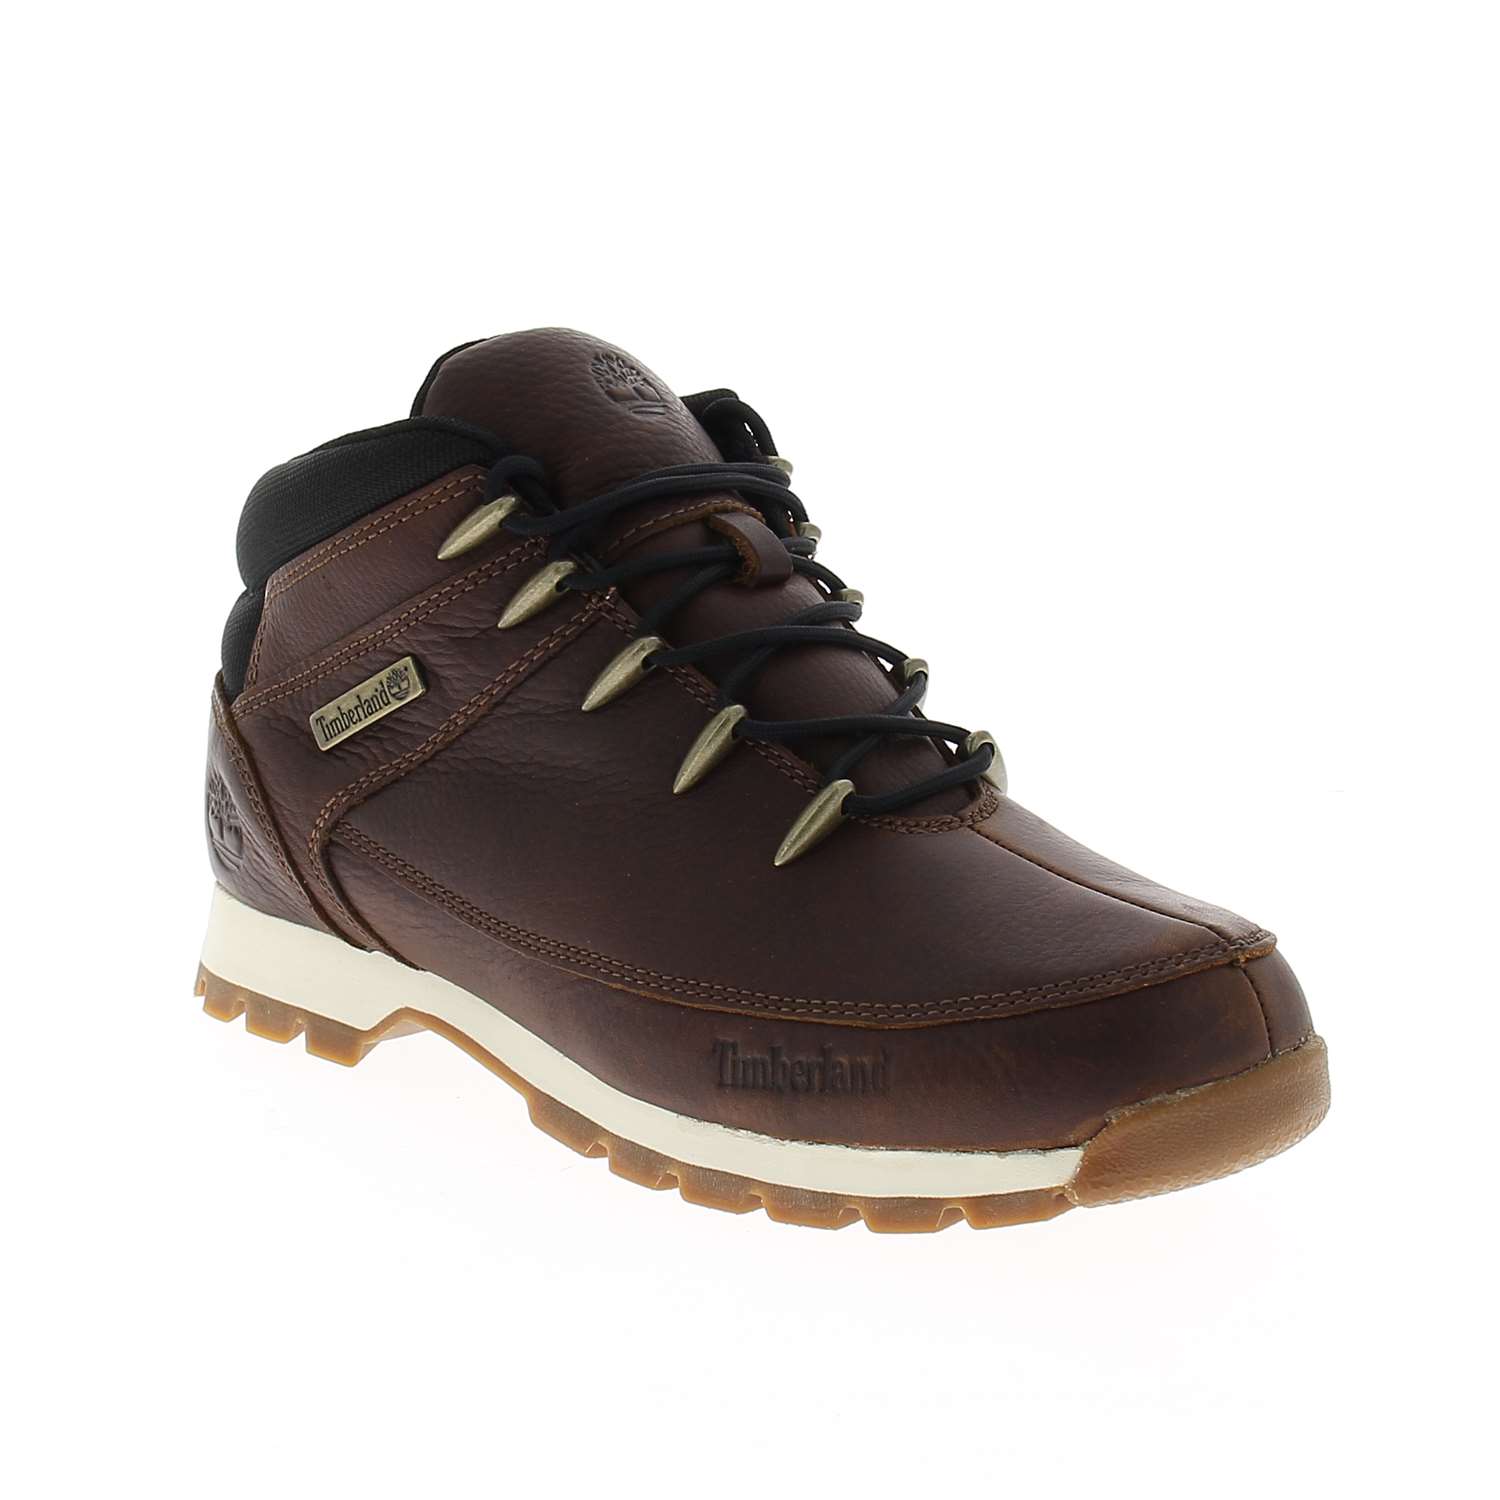 Homme Chaussures Timberland Homme Chaussures à lacets Timberland Homme Chaussures à lacets TIMBERLAND 44 noir Chaussures à lacets Timberland Homme 